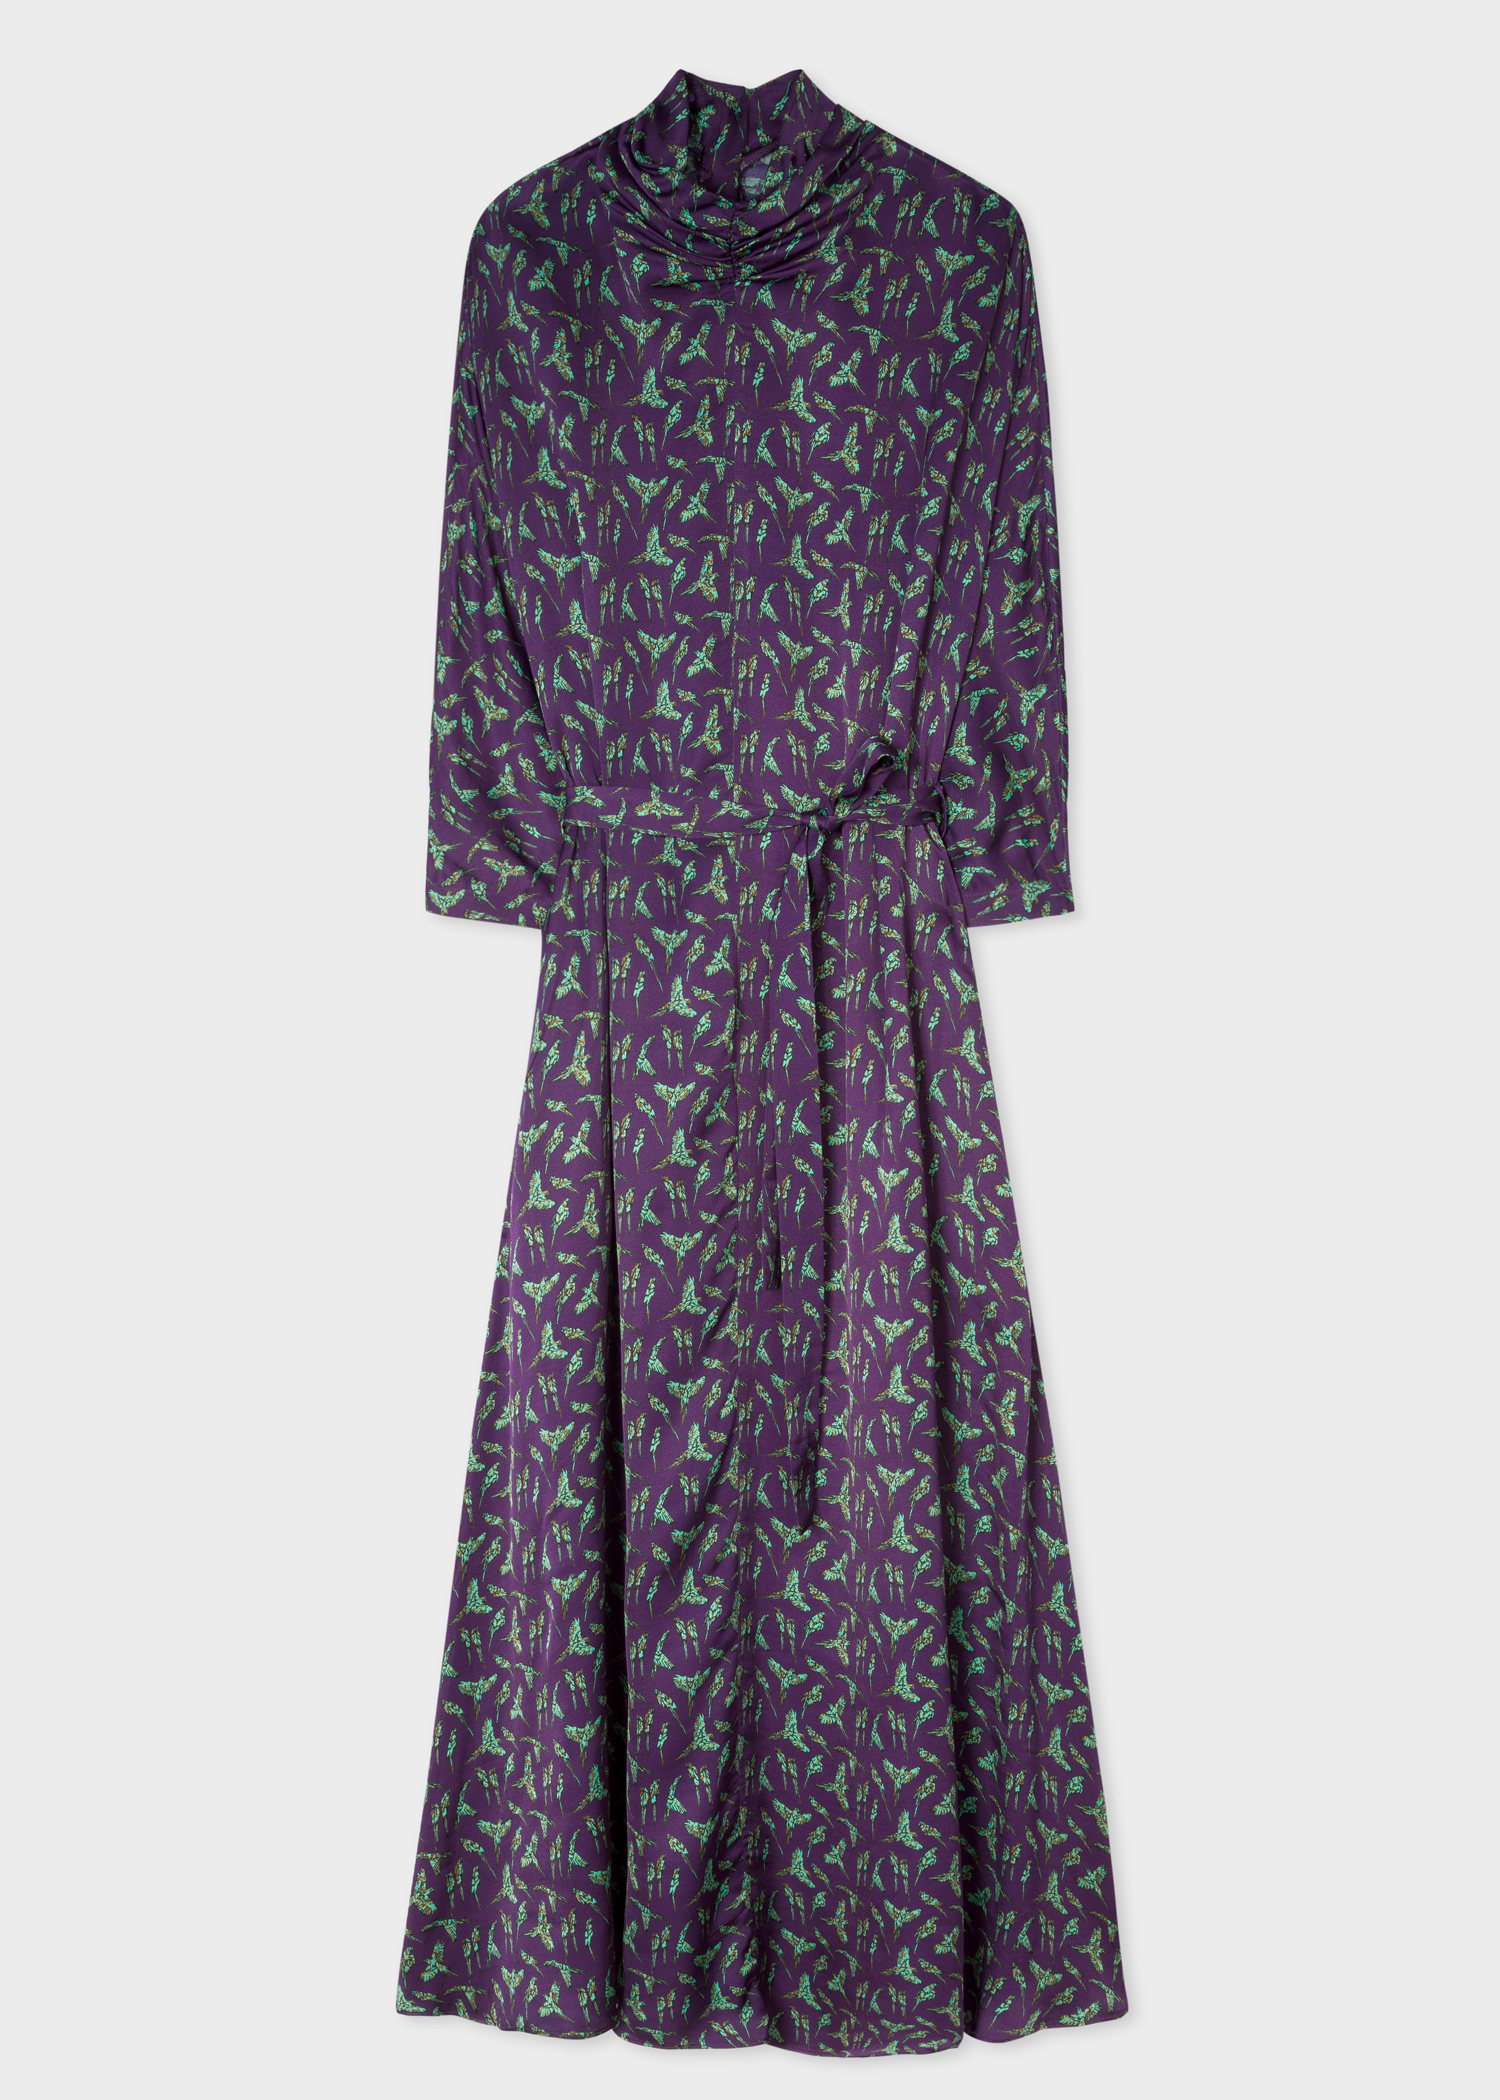 Front view - Women's Violet 'Parrot' Print Gathered-Neck Midi Dress Paul Smith